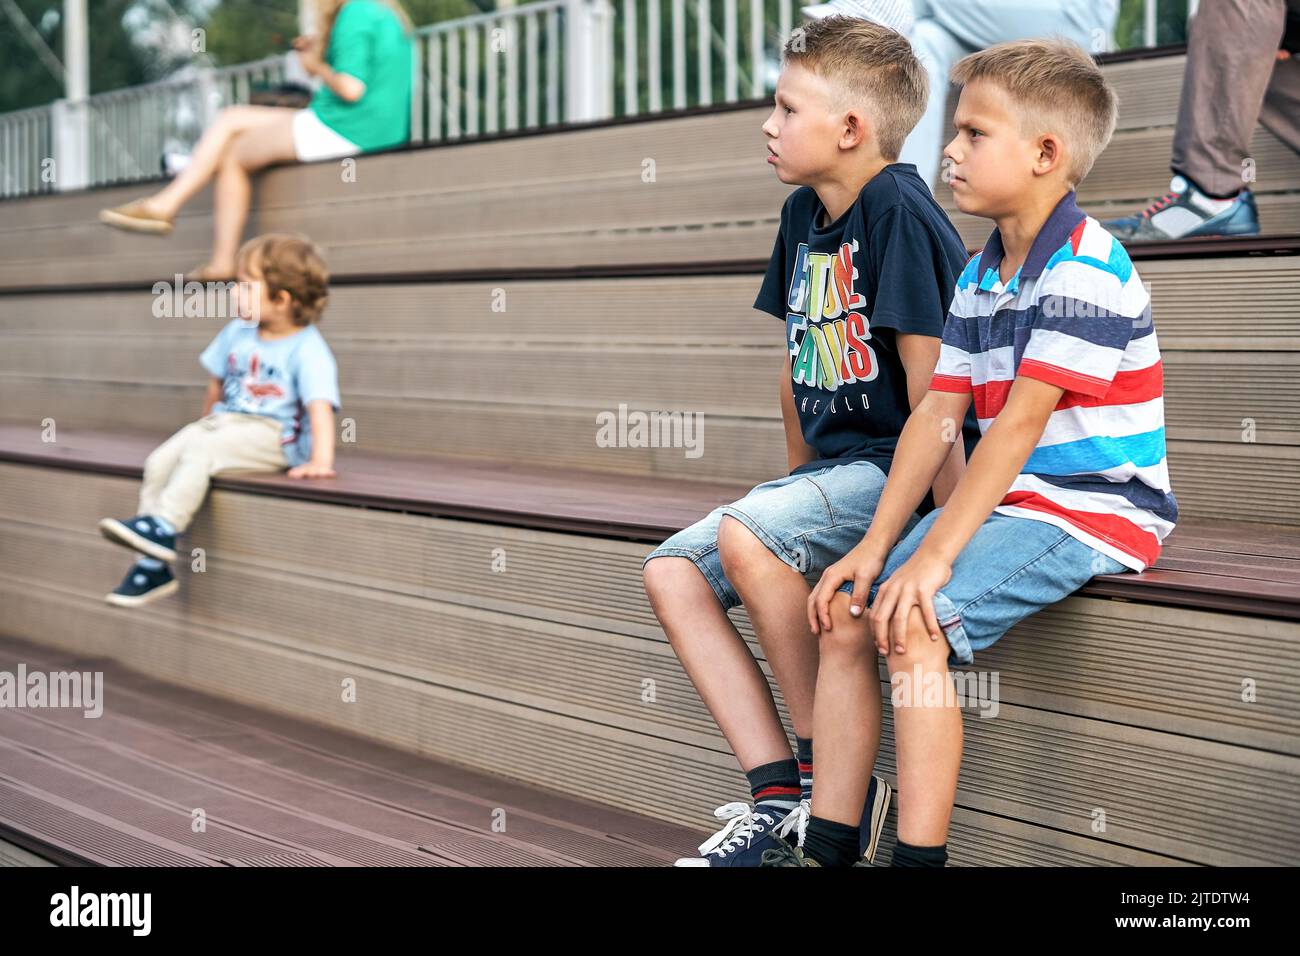 Boys in stylish casual clothes sit on wooden bench watching movie on huge screen in public park Stock Photo